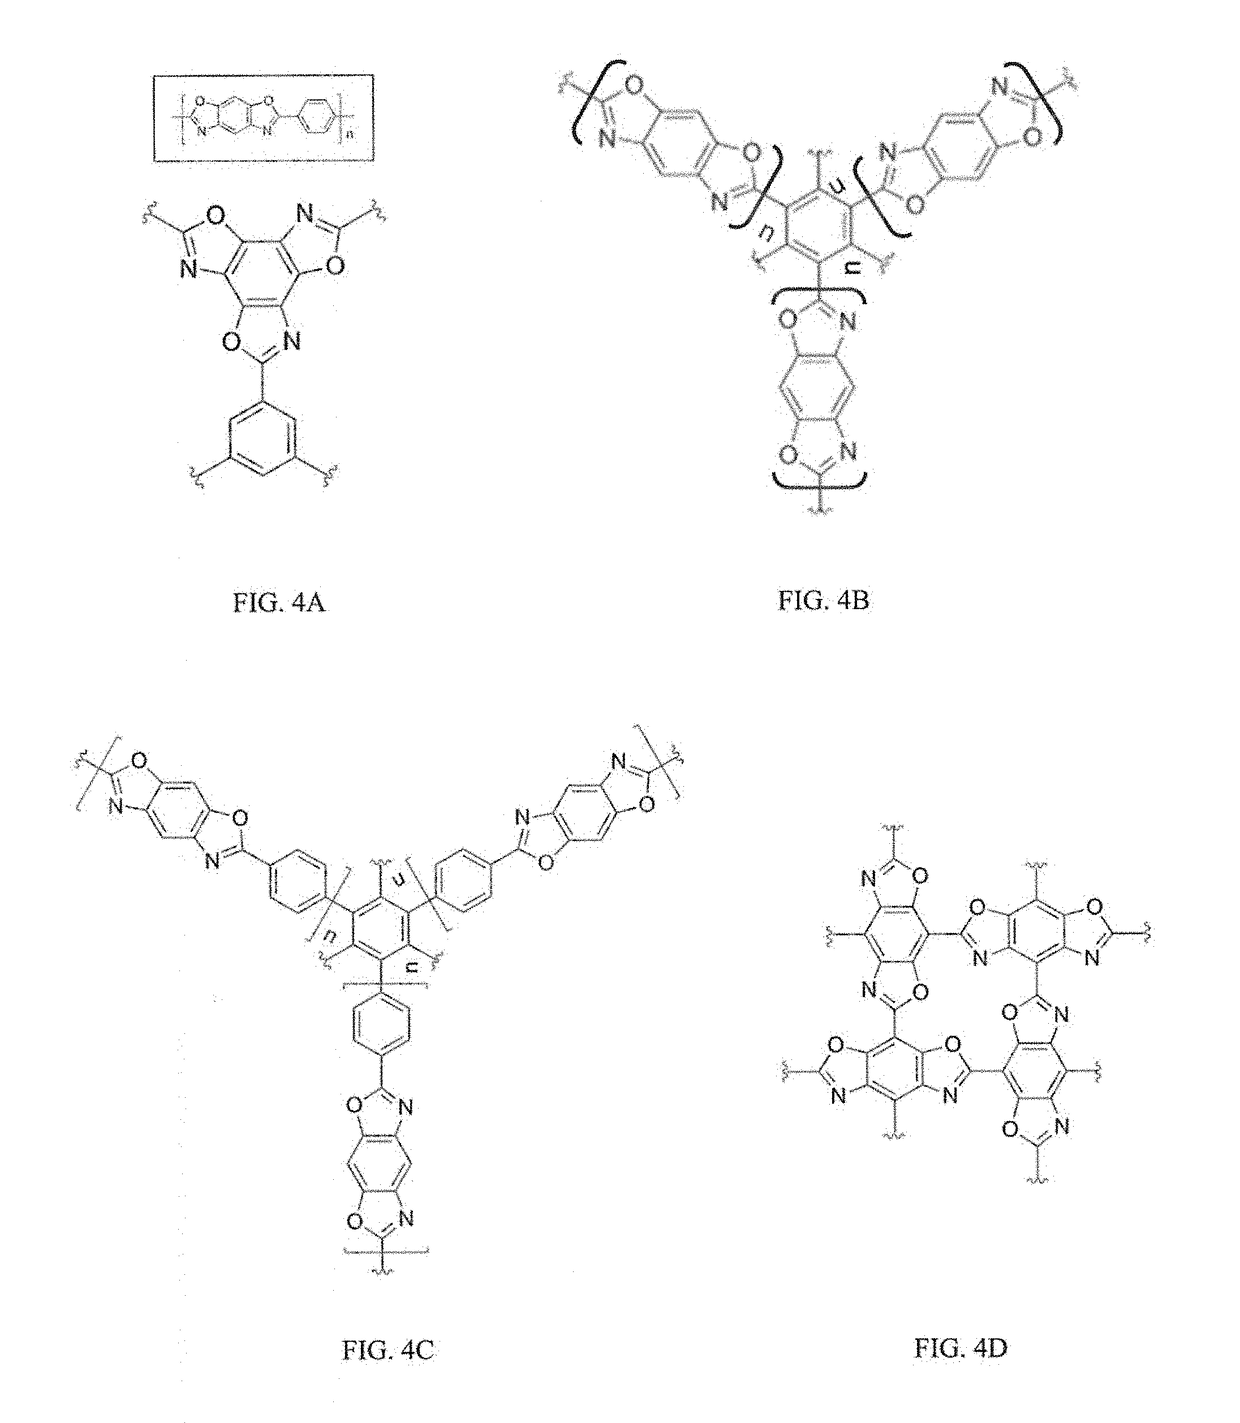 Two-dimensional polymers comprised of a combination of stiff and compliant molecular units